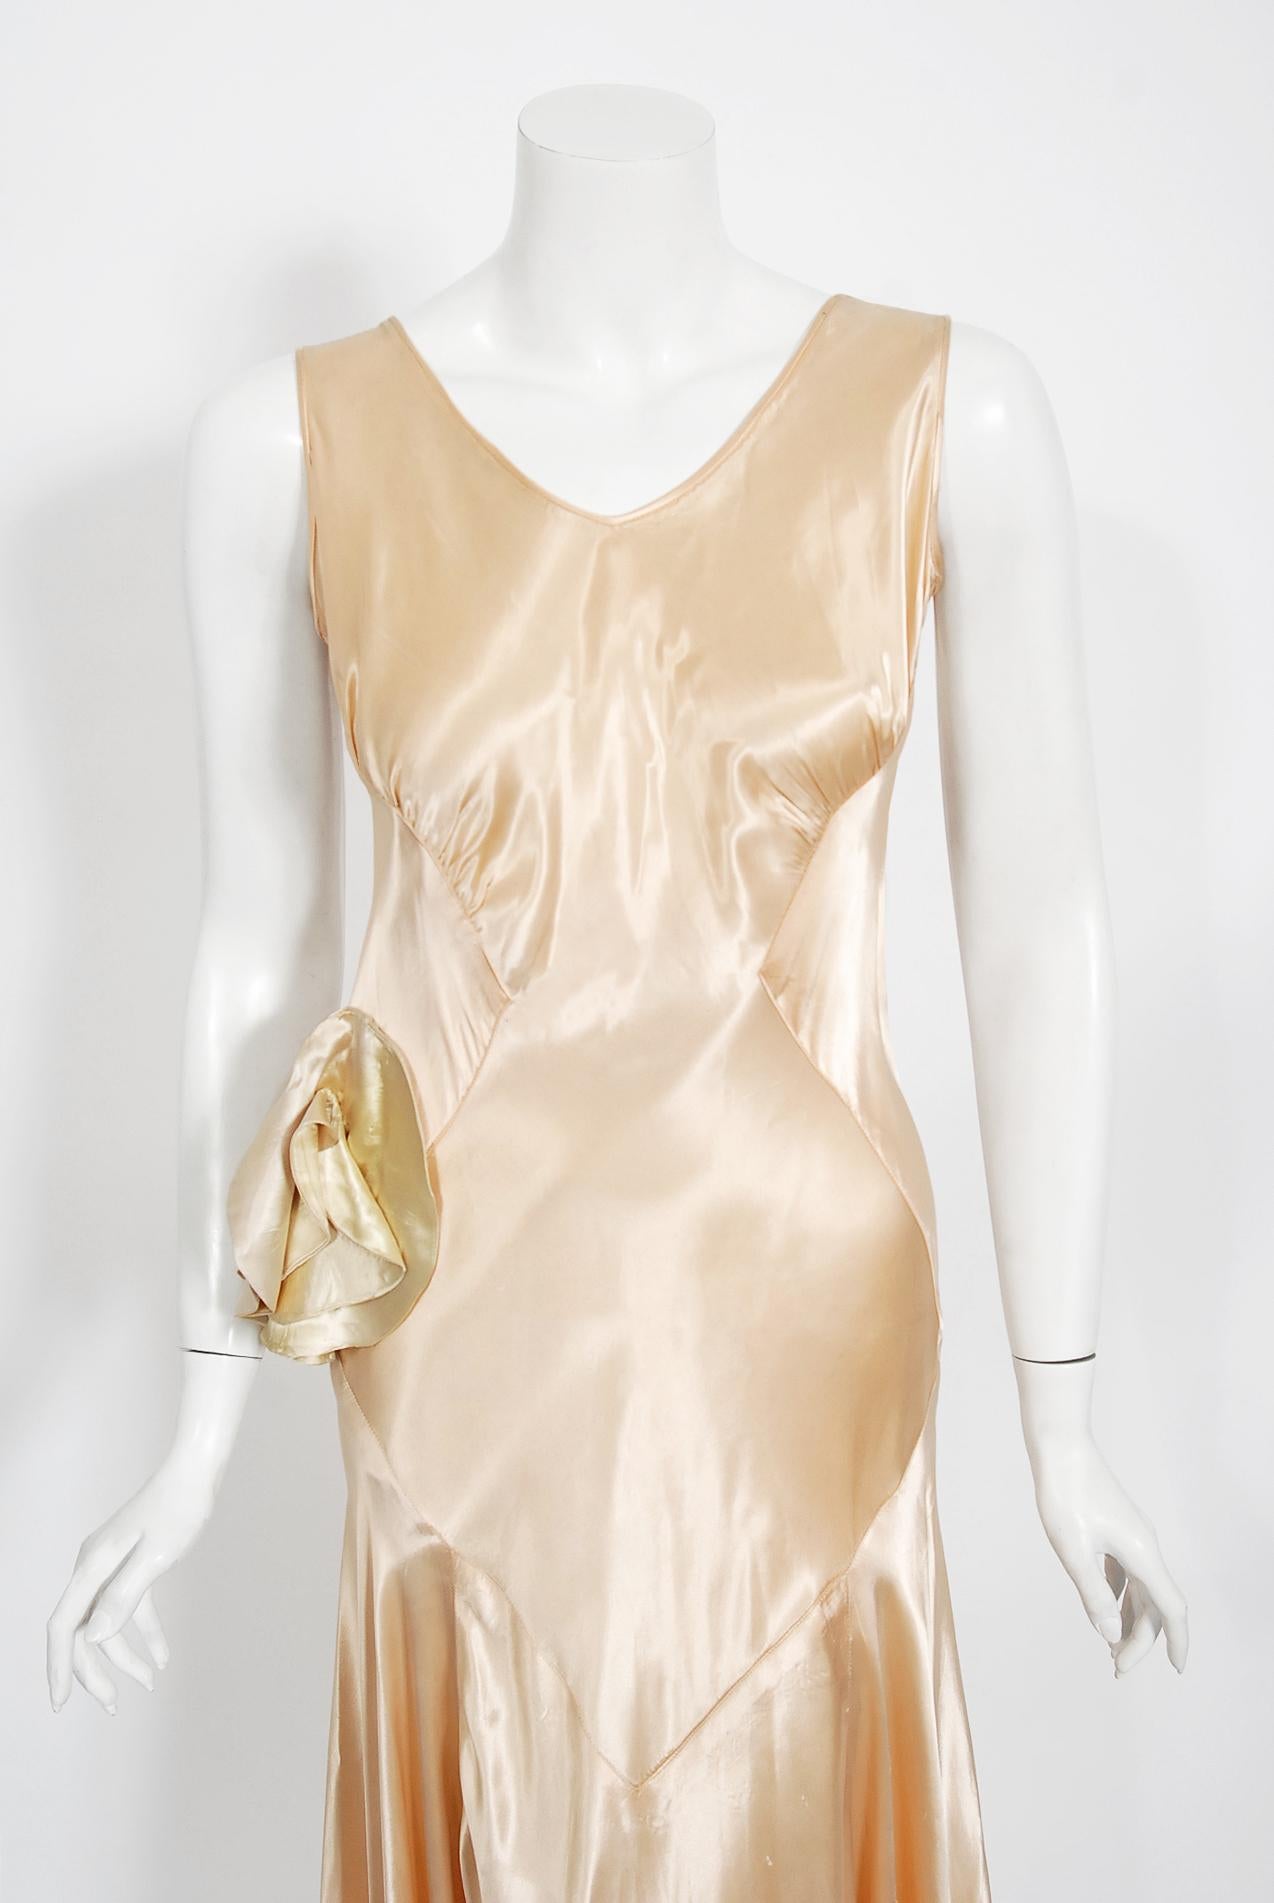 A breathtaking 1930's custom-made champagne silk satin gown from the Old Hollywood era of glamour. There is so much detail, you can tell this masterpiece was created with love and care. The bodice has a seductive sculpted v-cut plunge sleeveless